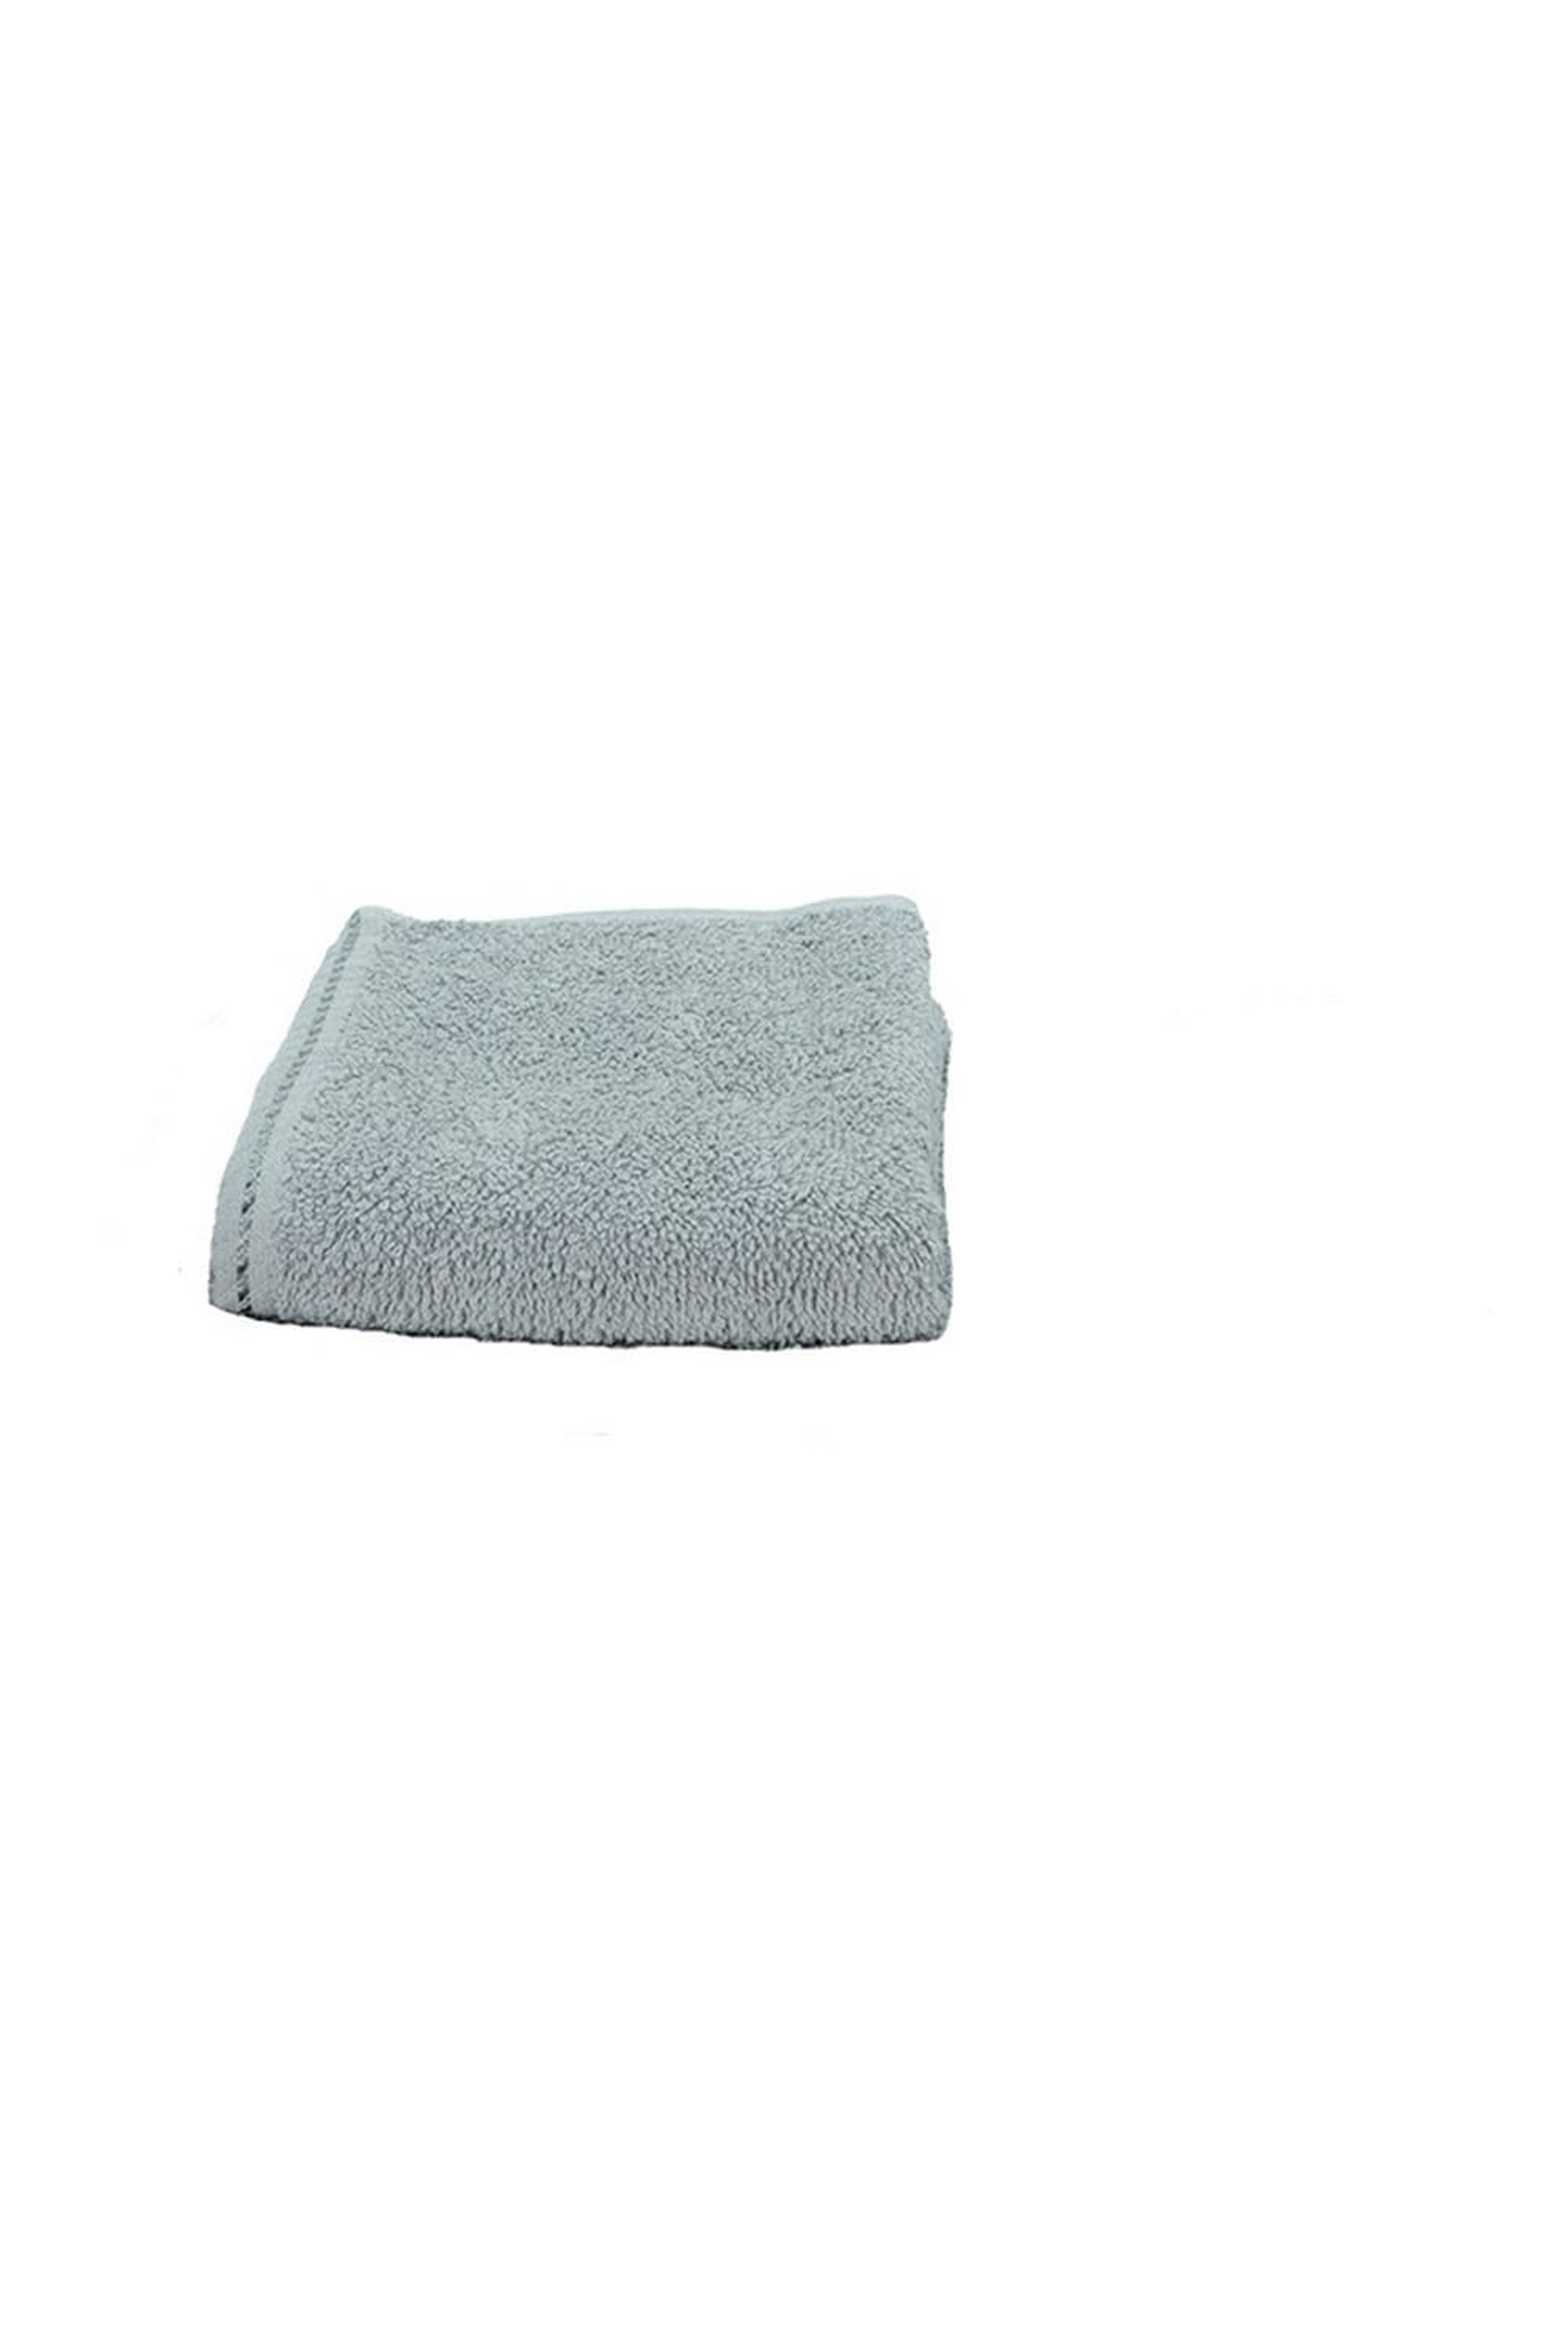 A&R TOWELS A&R TOWELS A&R TOWELS ULTRA SOFT GUEST TOWEL (ANTHRACITE GRAY) (ONE SIZE)